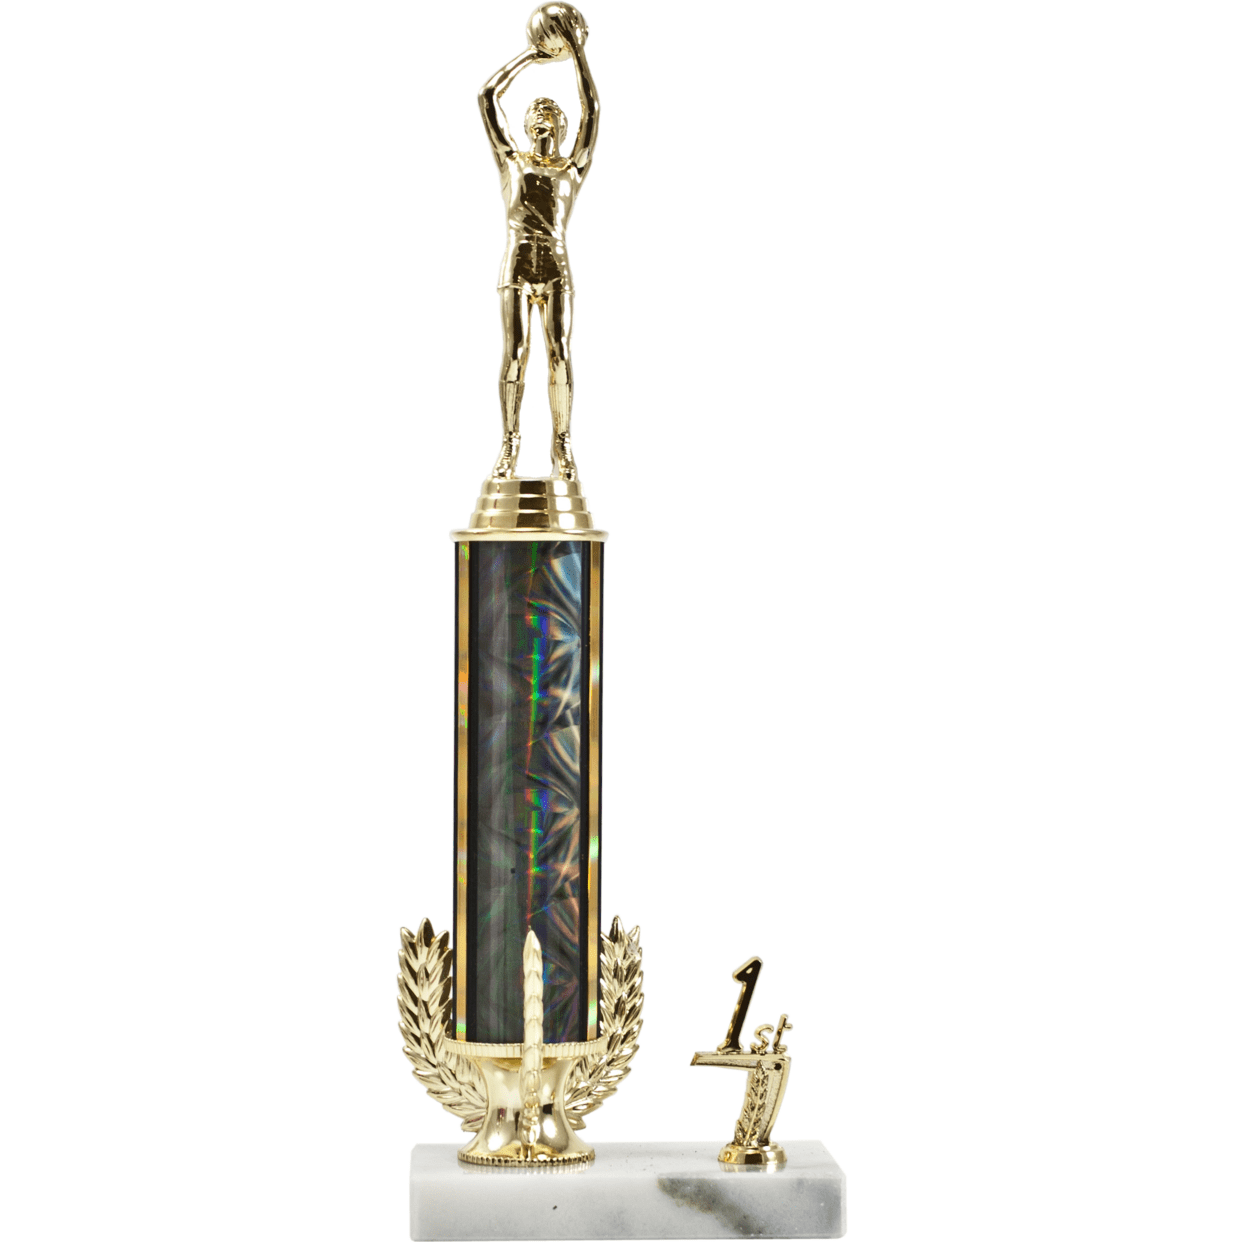 Tri-Wreath Round Column Trophy With Trim | Global Recognition Inc